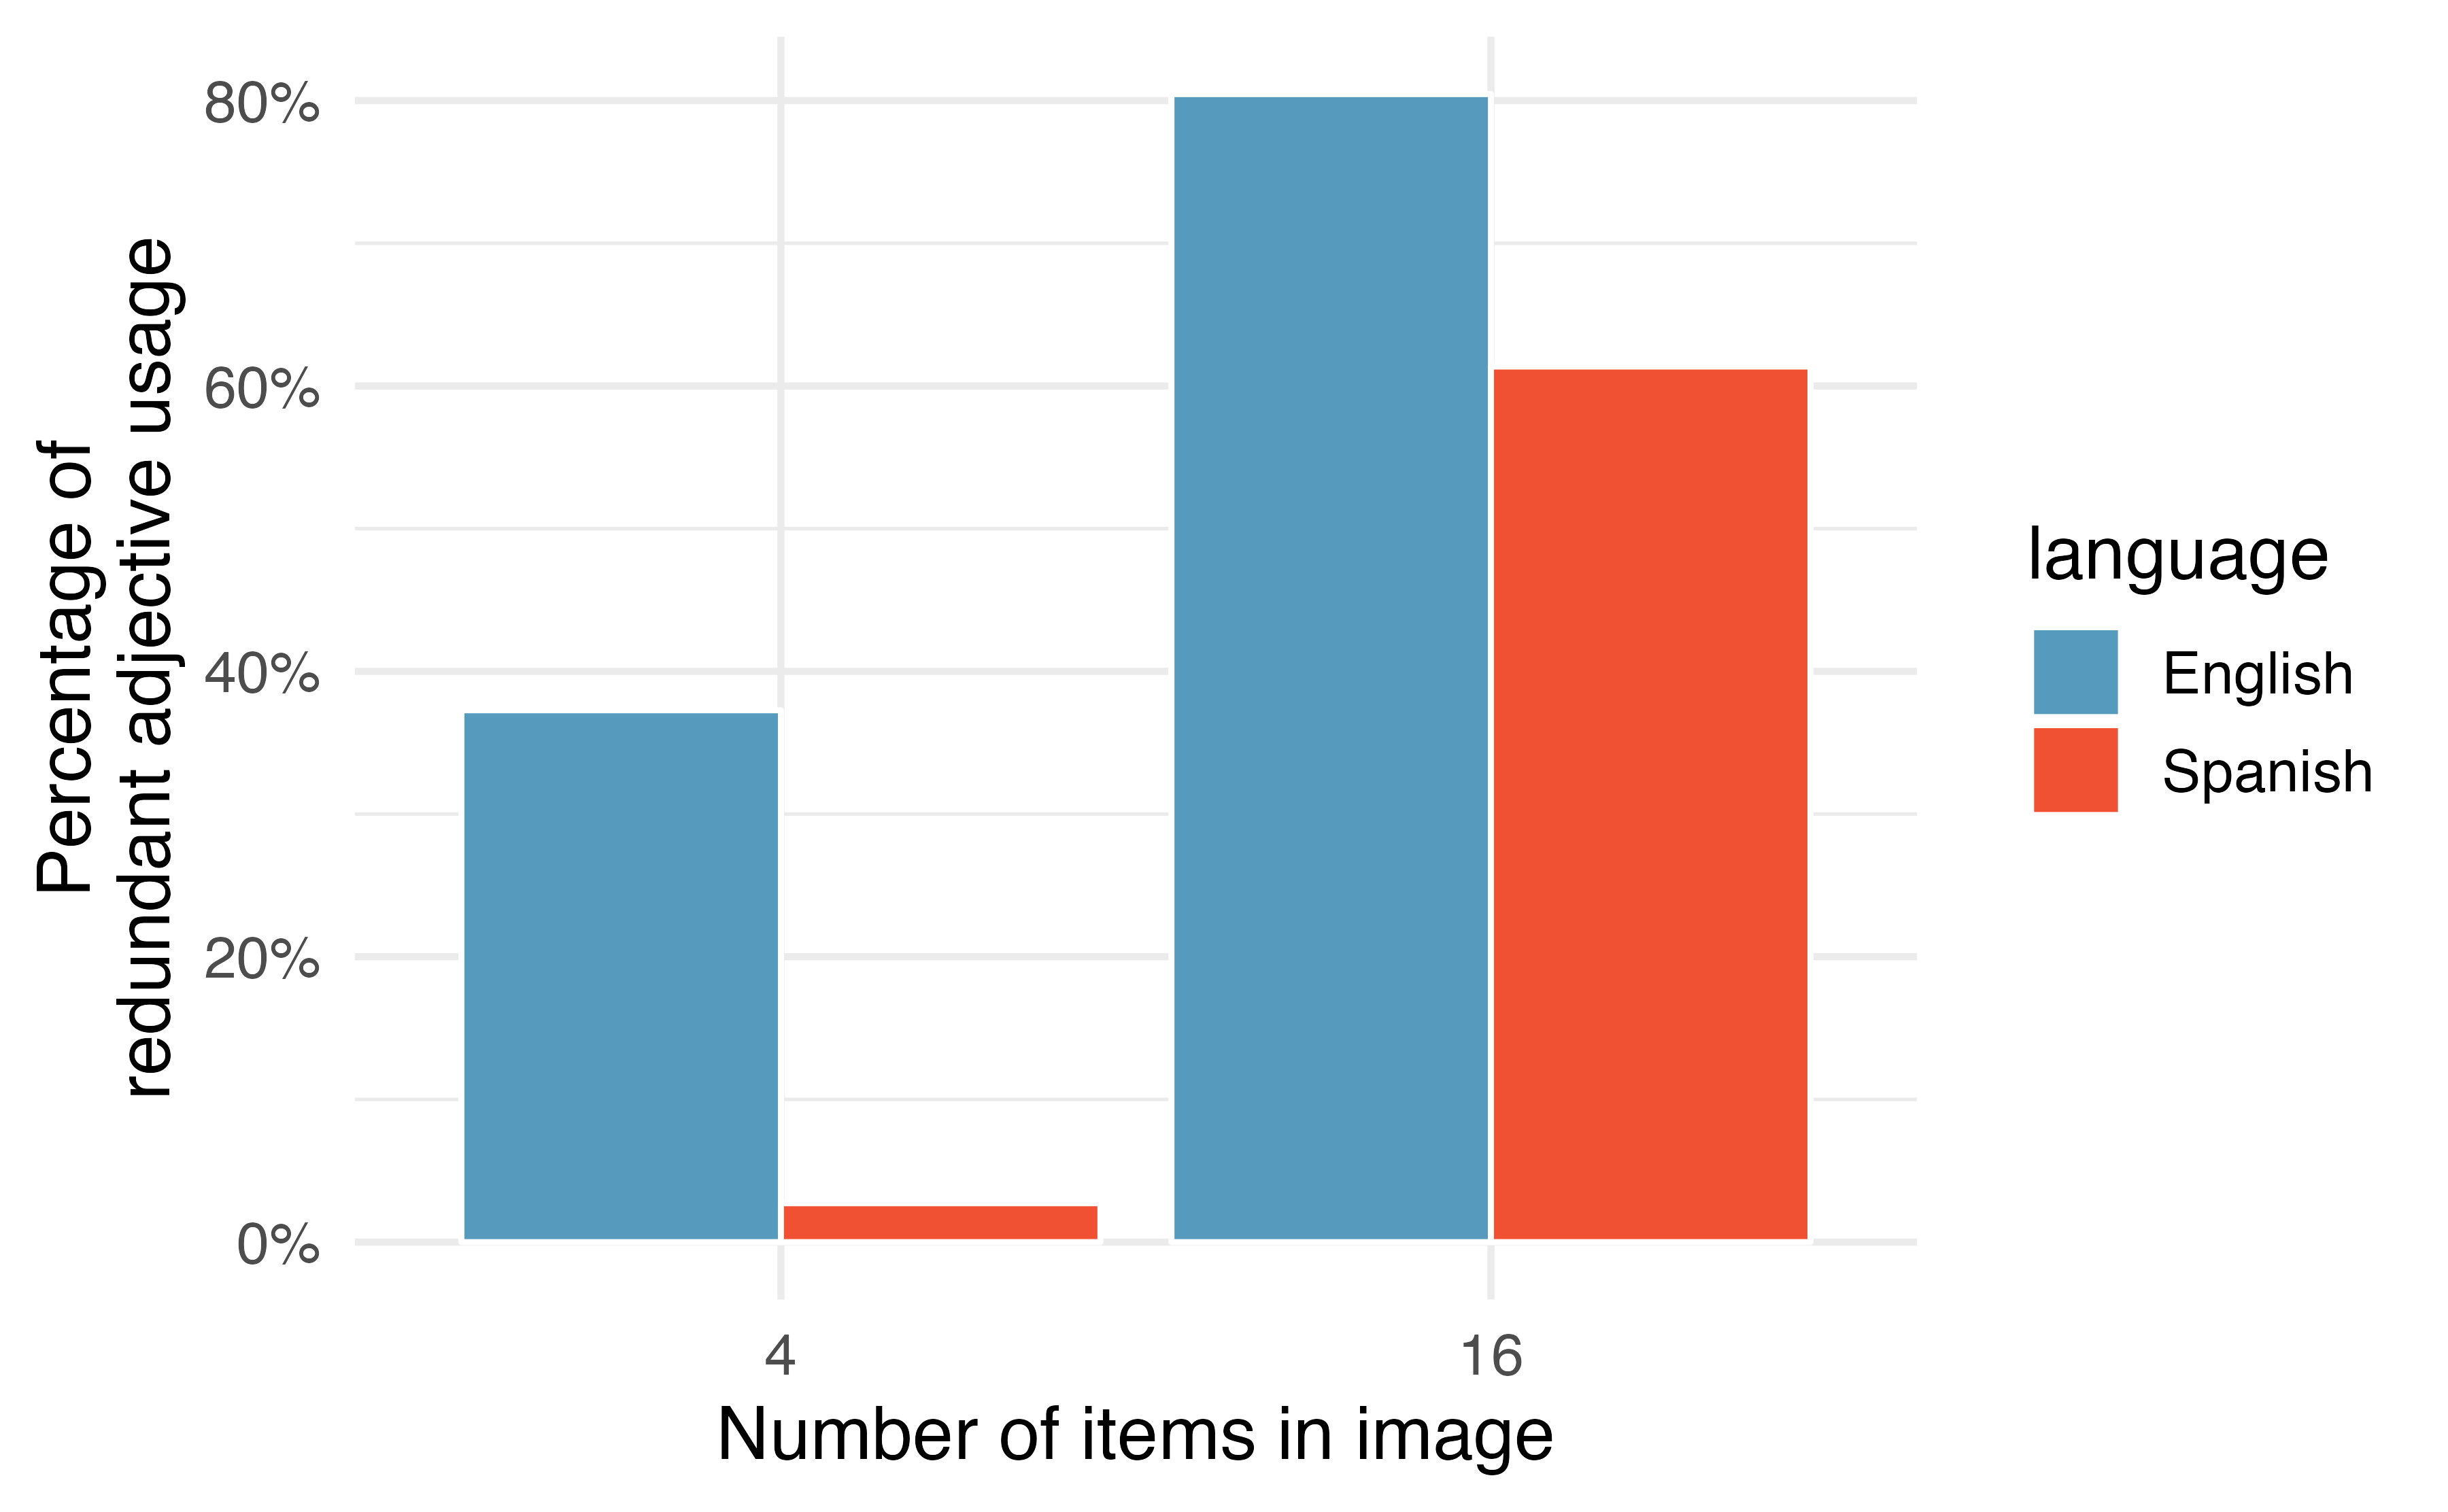 Results of redundant adjective usage experiment from [@rubio-fernandez2021]. English speakers are more likely than Spanish speakers to use redundant adjectives, regardless of number of items in image. For both images, respondents are more likely to use a redundant adjective when there are more items in the image.